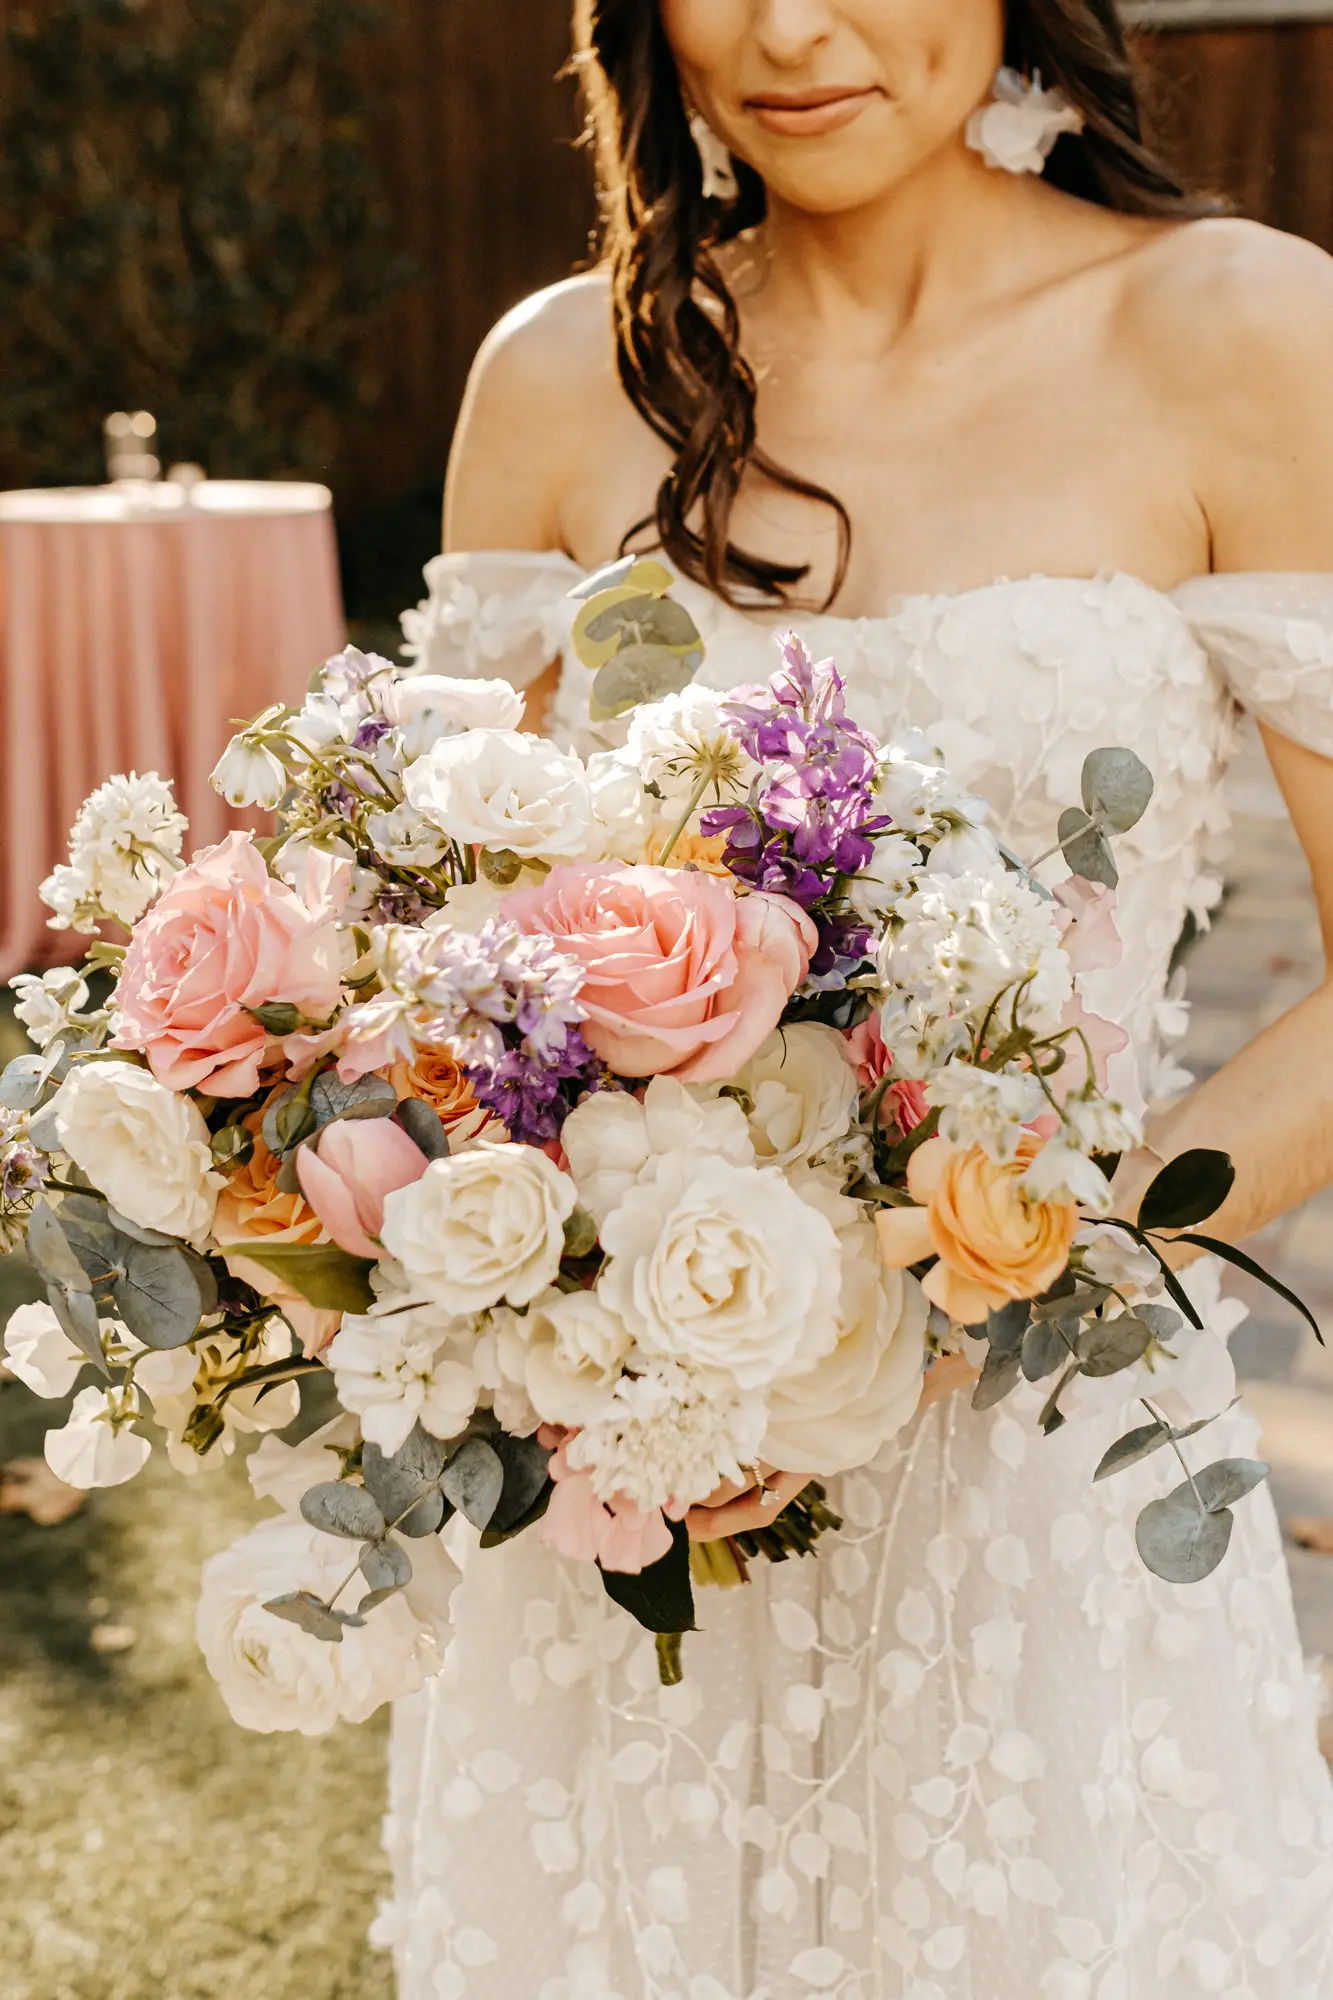 Spring Bridal Wedding Bouquet Ideas | Pink and Orange Roses, White Hydrangeas, Purple Flowers, and Greenery Floral Arrangement Inspiration | Tampa Bay Florist Monarch Events